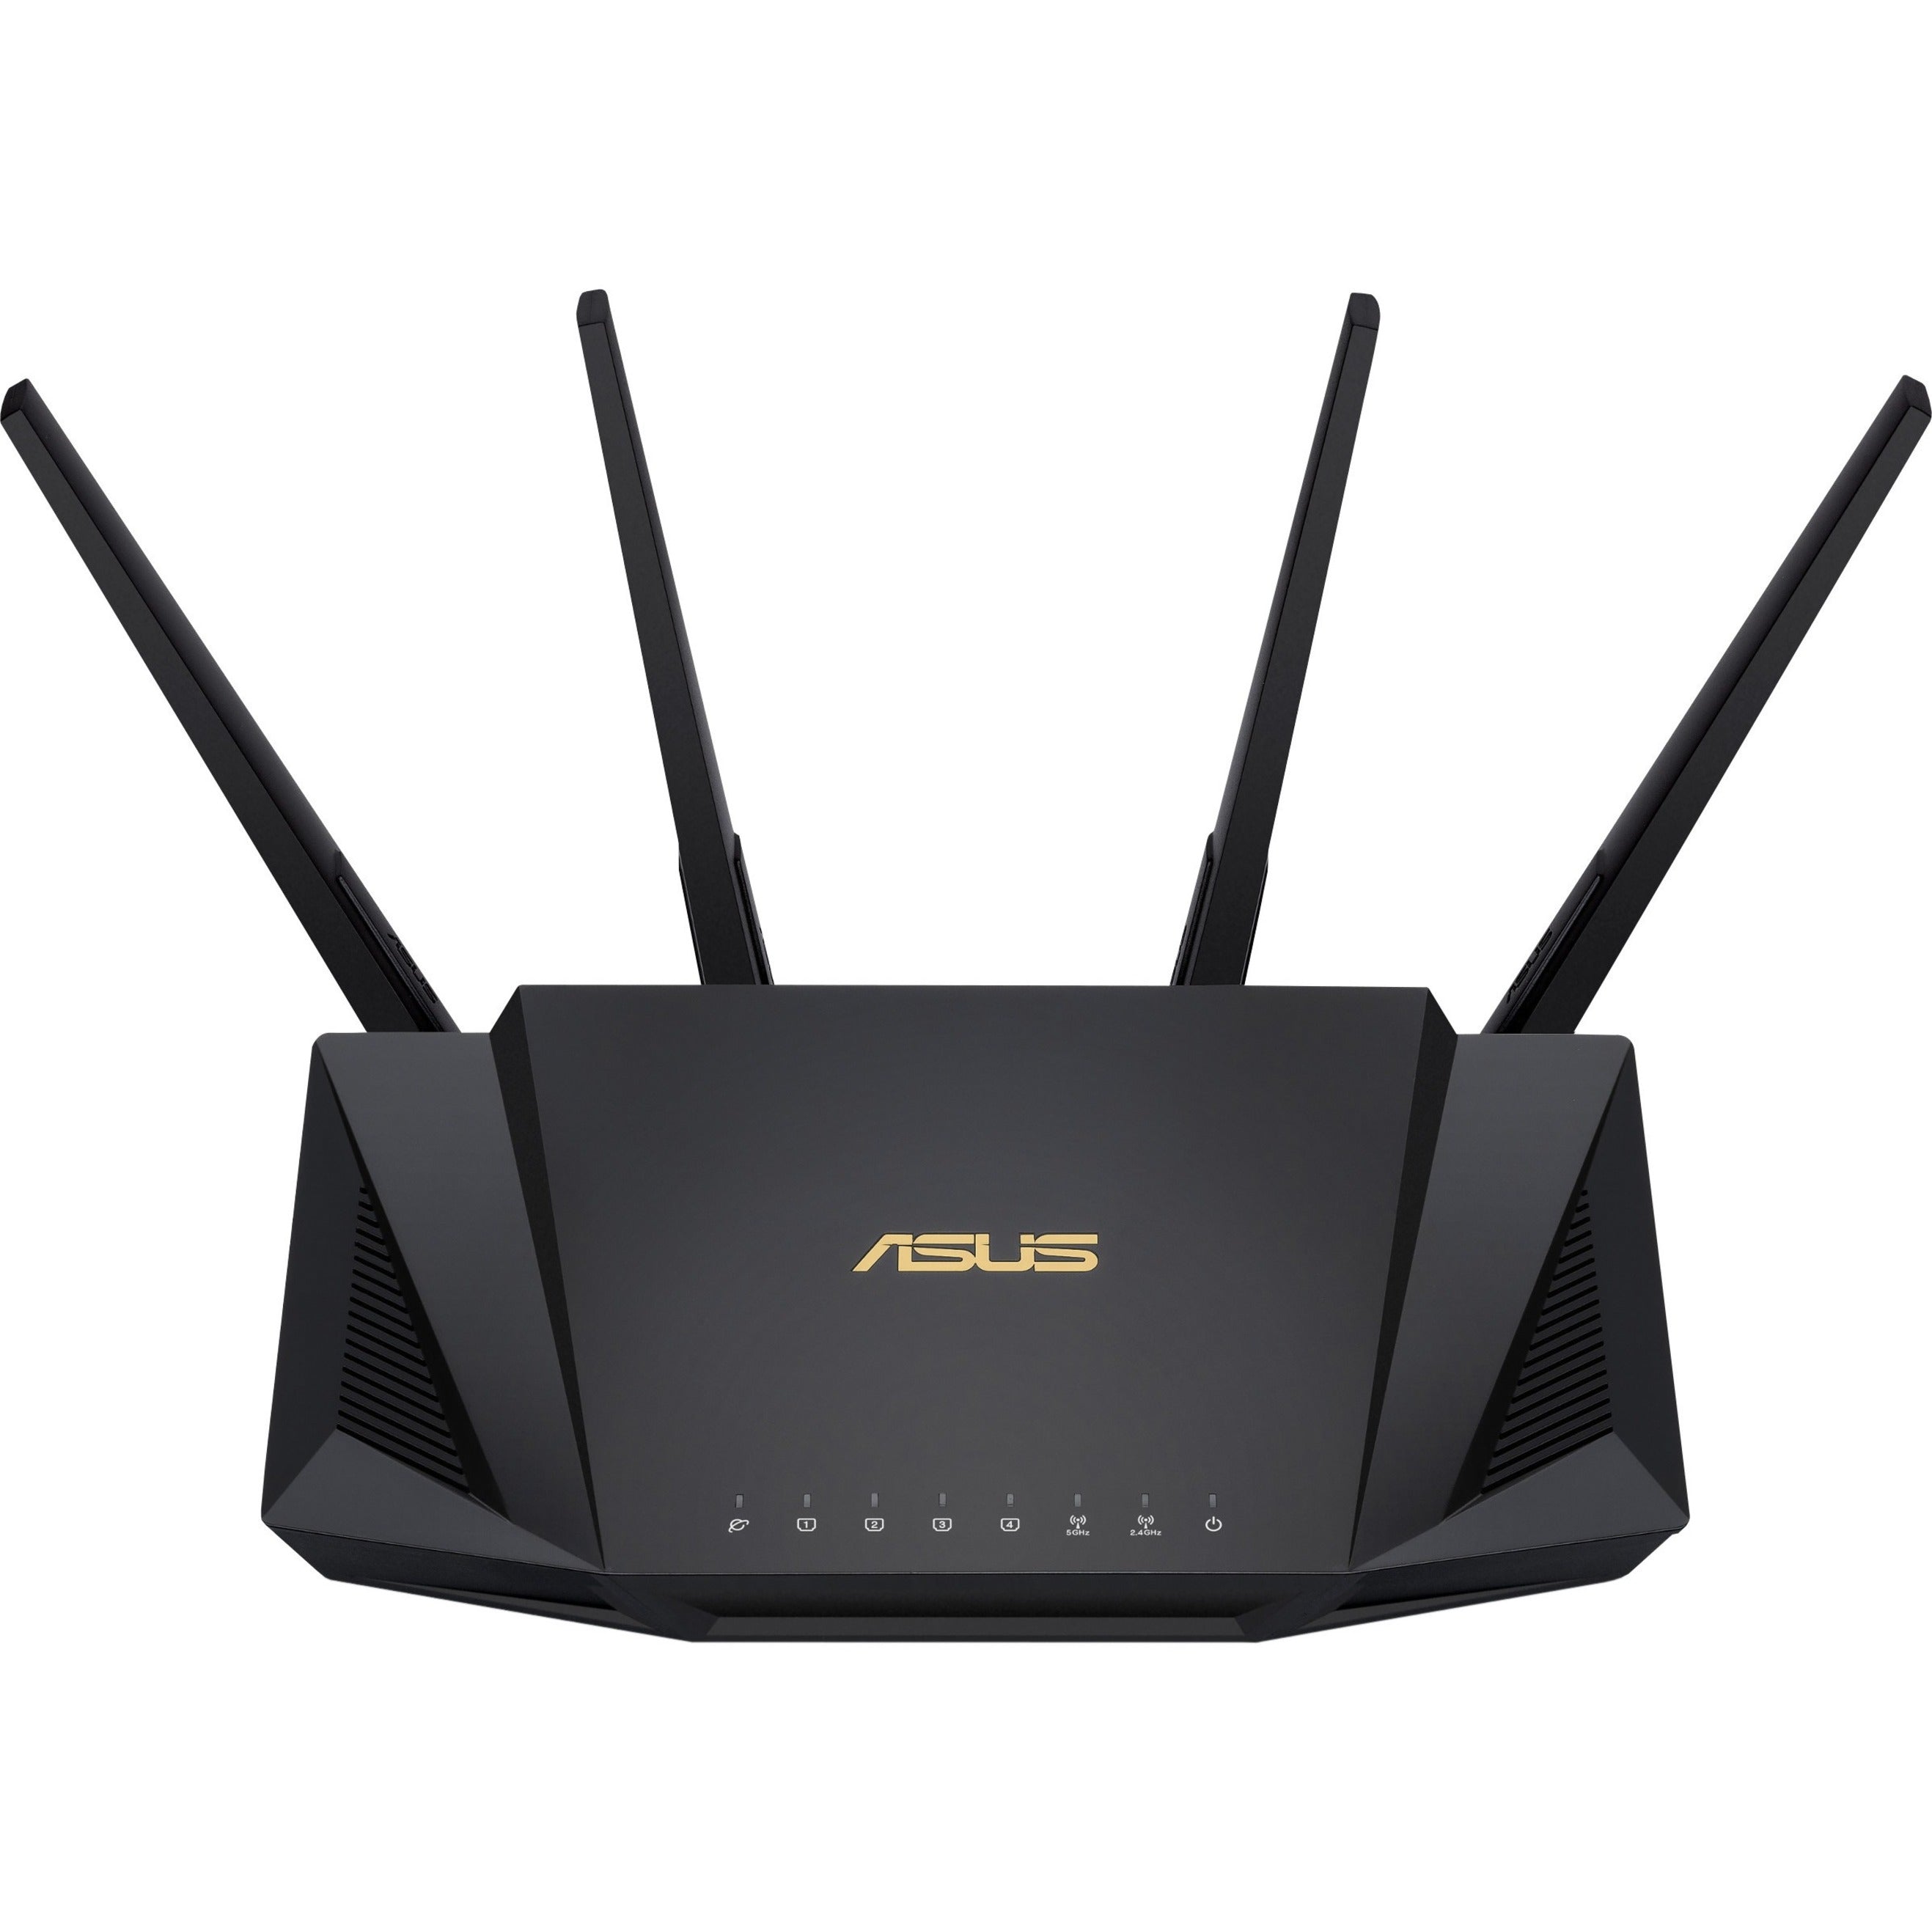 Asus RT-AX3000 AiMesh Wi-Fi 6 Wireless Router, Gigabit Ethernet, USB, VPN Supported